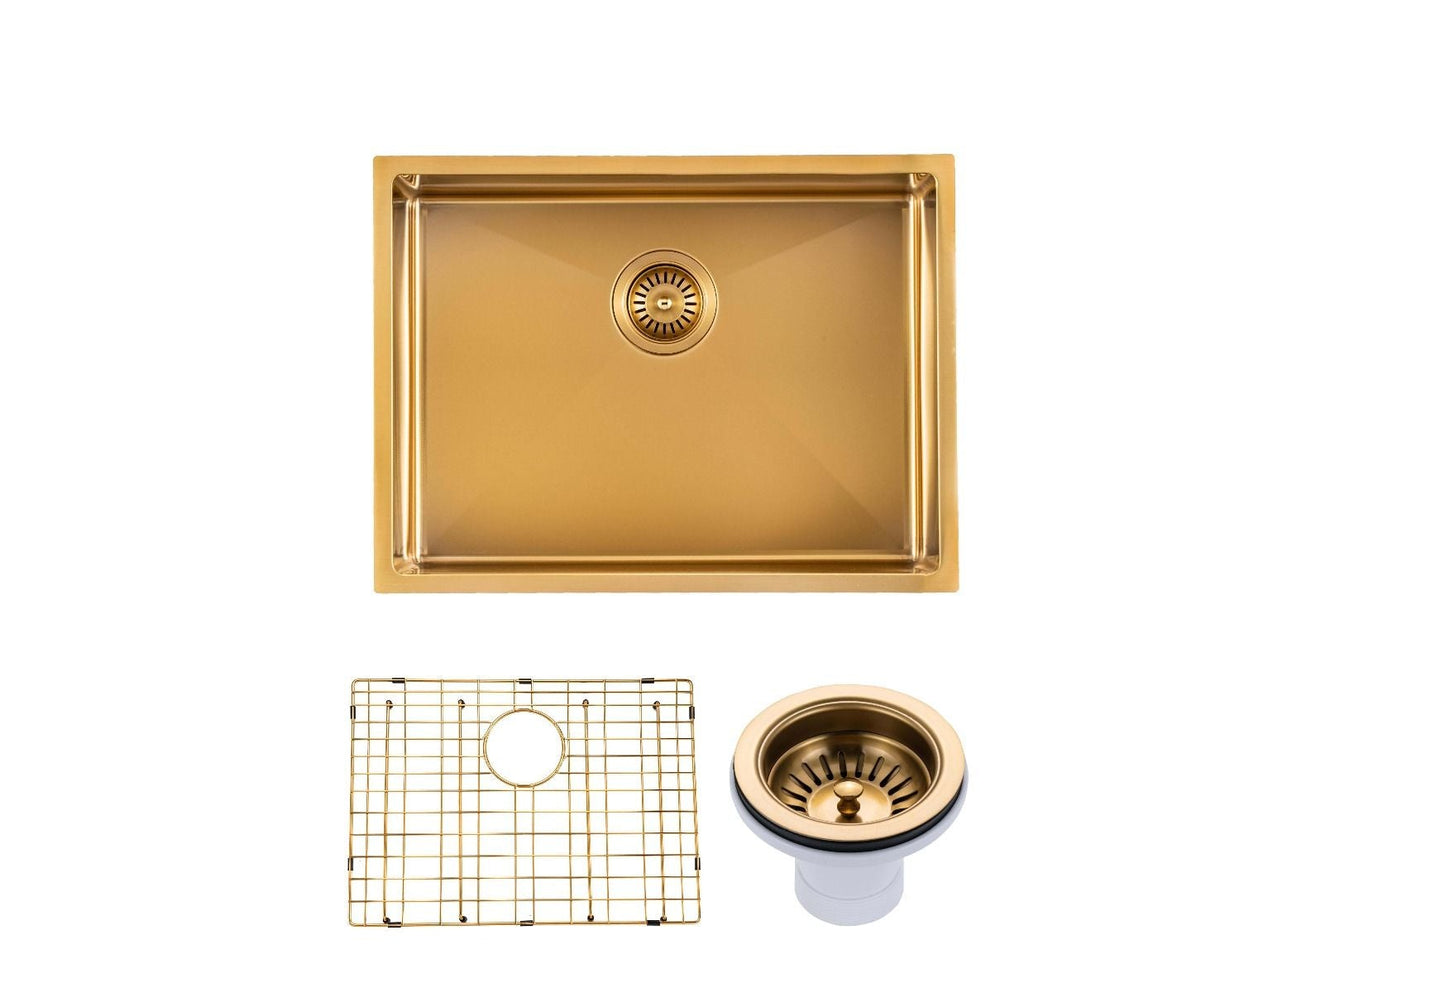 Stainless Steel Brushed Gold Sink with Single Bowl 600x450x300